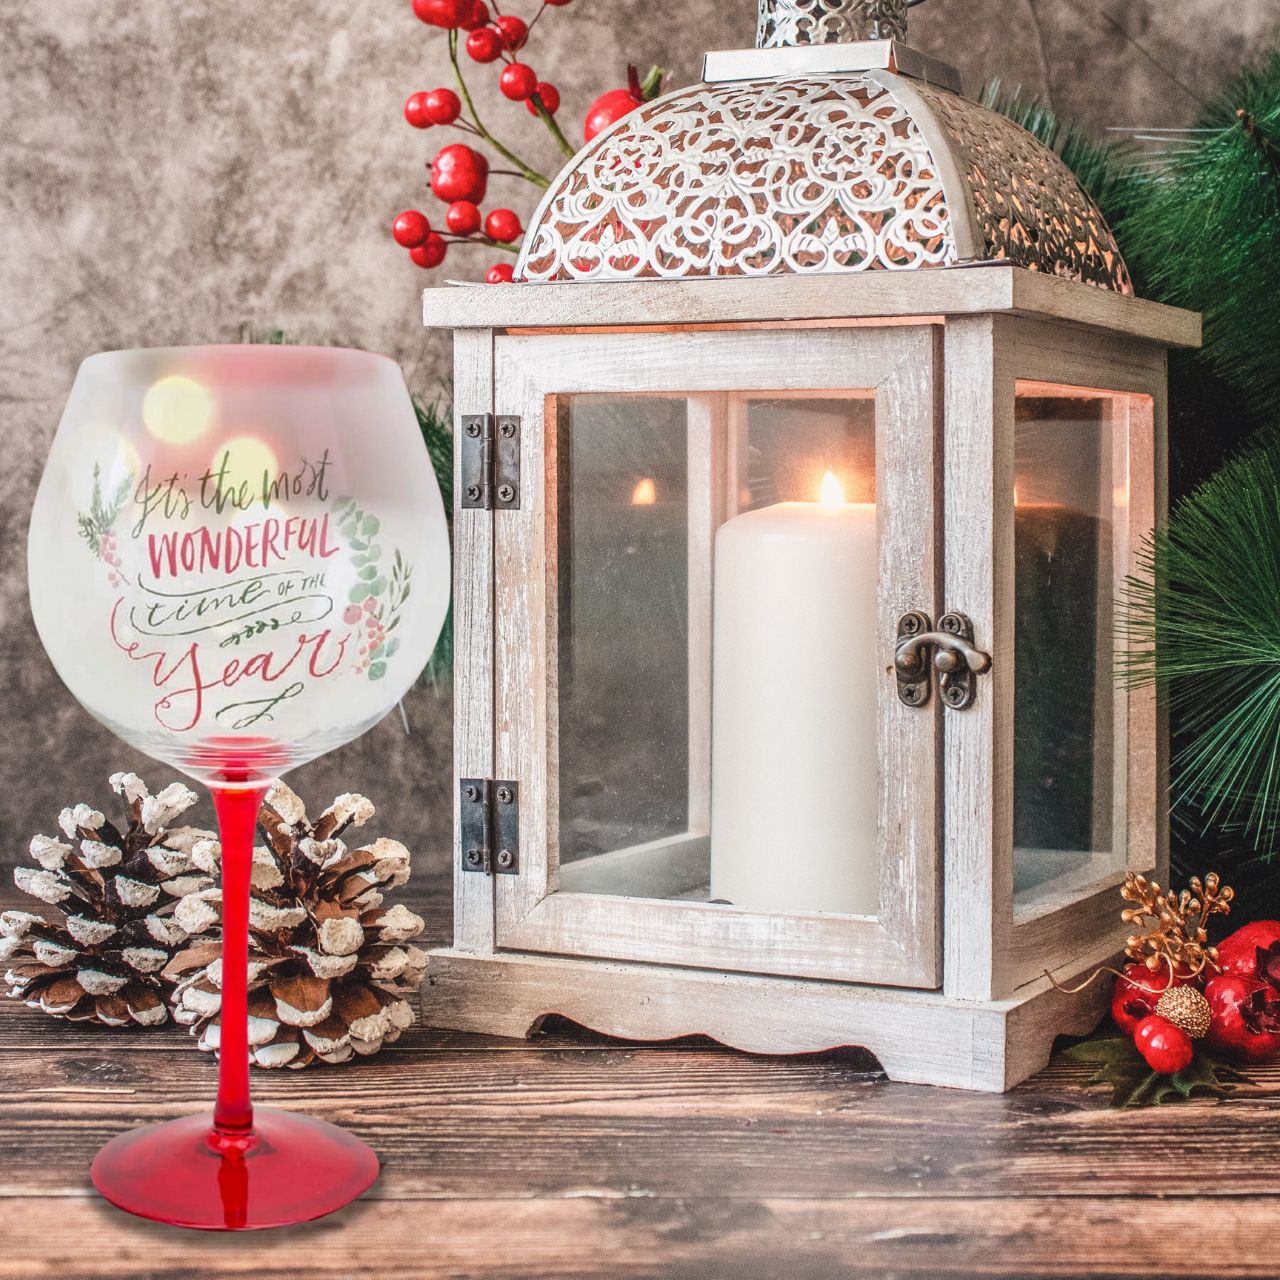 Most Wonderful Time of the Year Gin Glass  A relaxing, cosy Christmas has never been so simple to achieve. Step away from the hustle and bustle and delve into a blissful, traditional Christmas with Holiday Cottage.